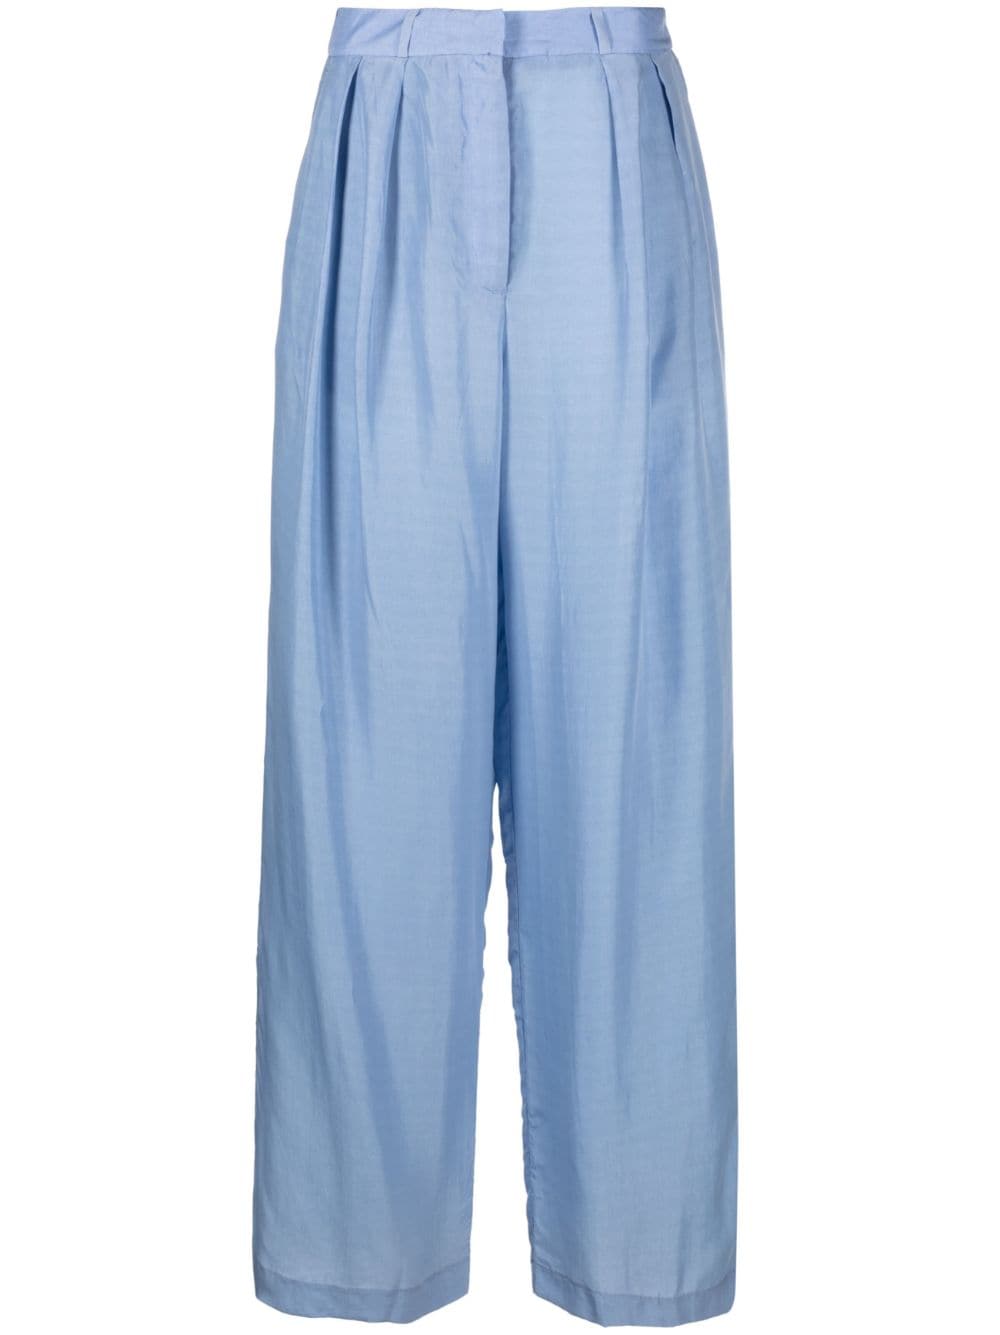 The Frankie Shop Tansy pleated wide-leg trousers - Blue